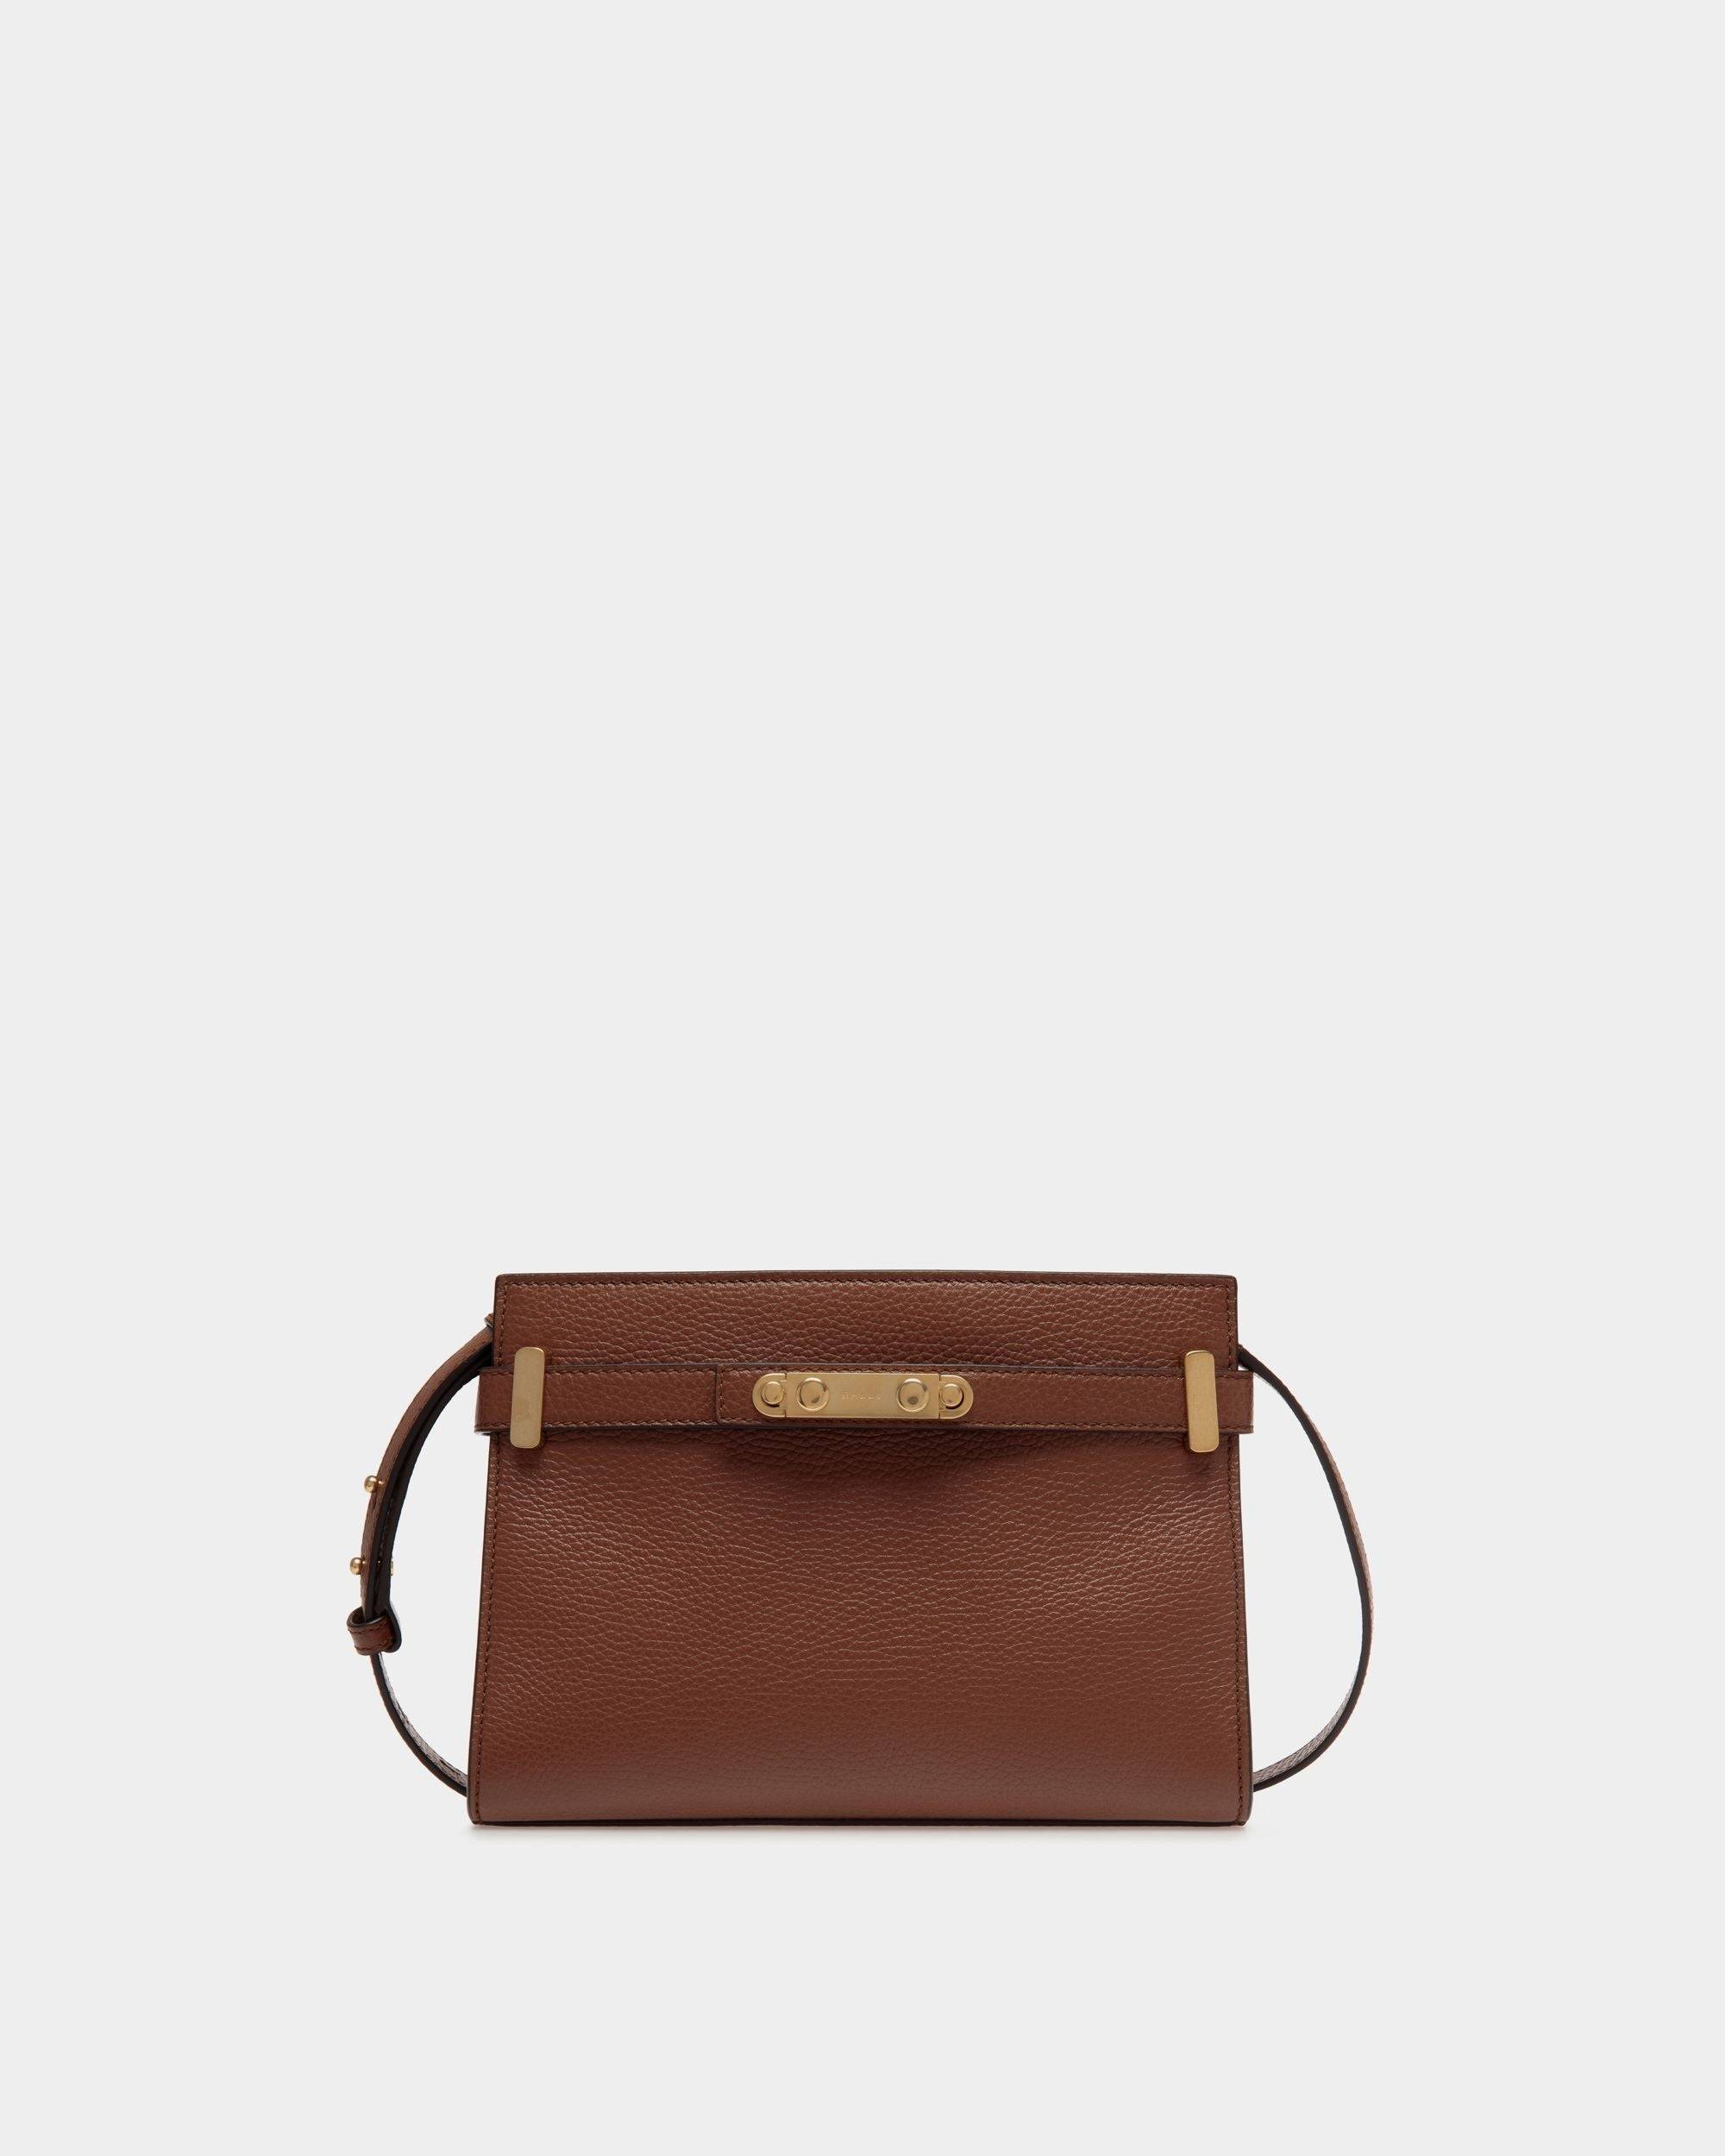 Carriage | Women's Crossbody Bag in Brown Grained Leather | Bally | Still Life Front